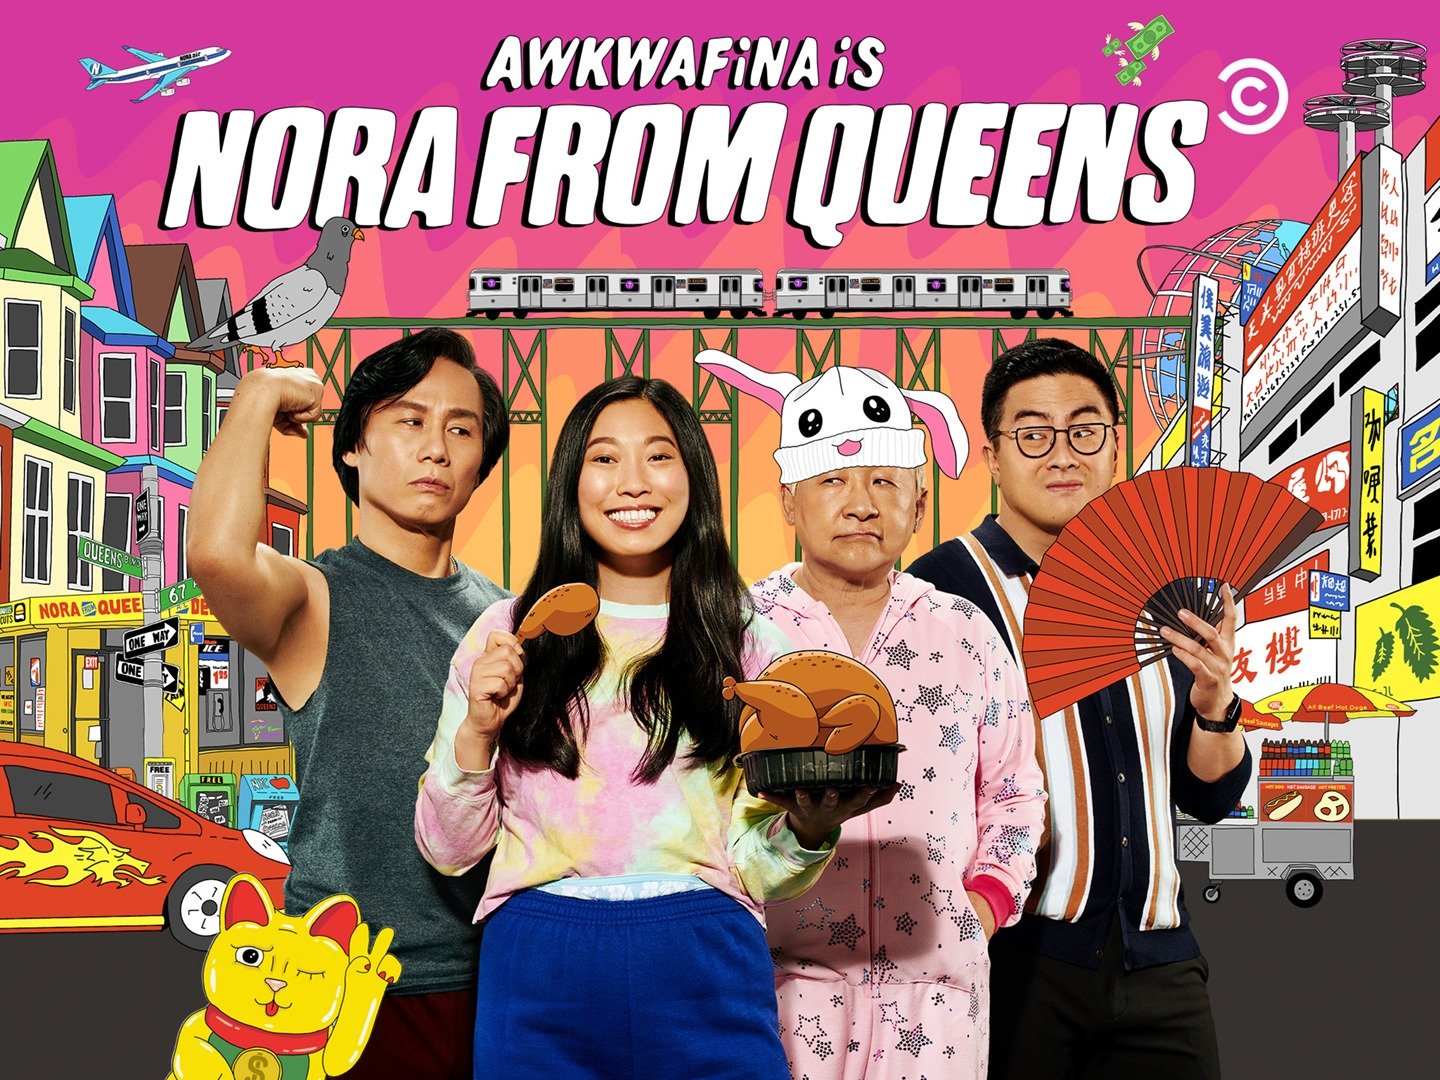 "Awkwafina Is Nora From Queens: Season 2 photo 1"